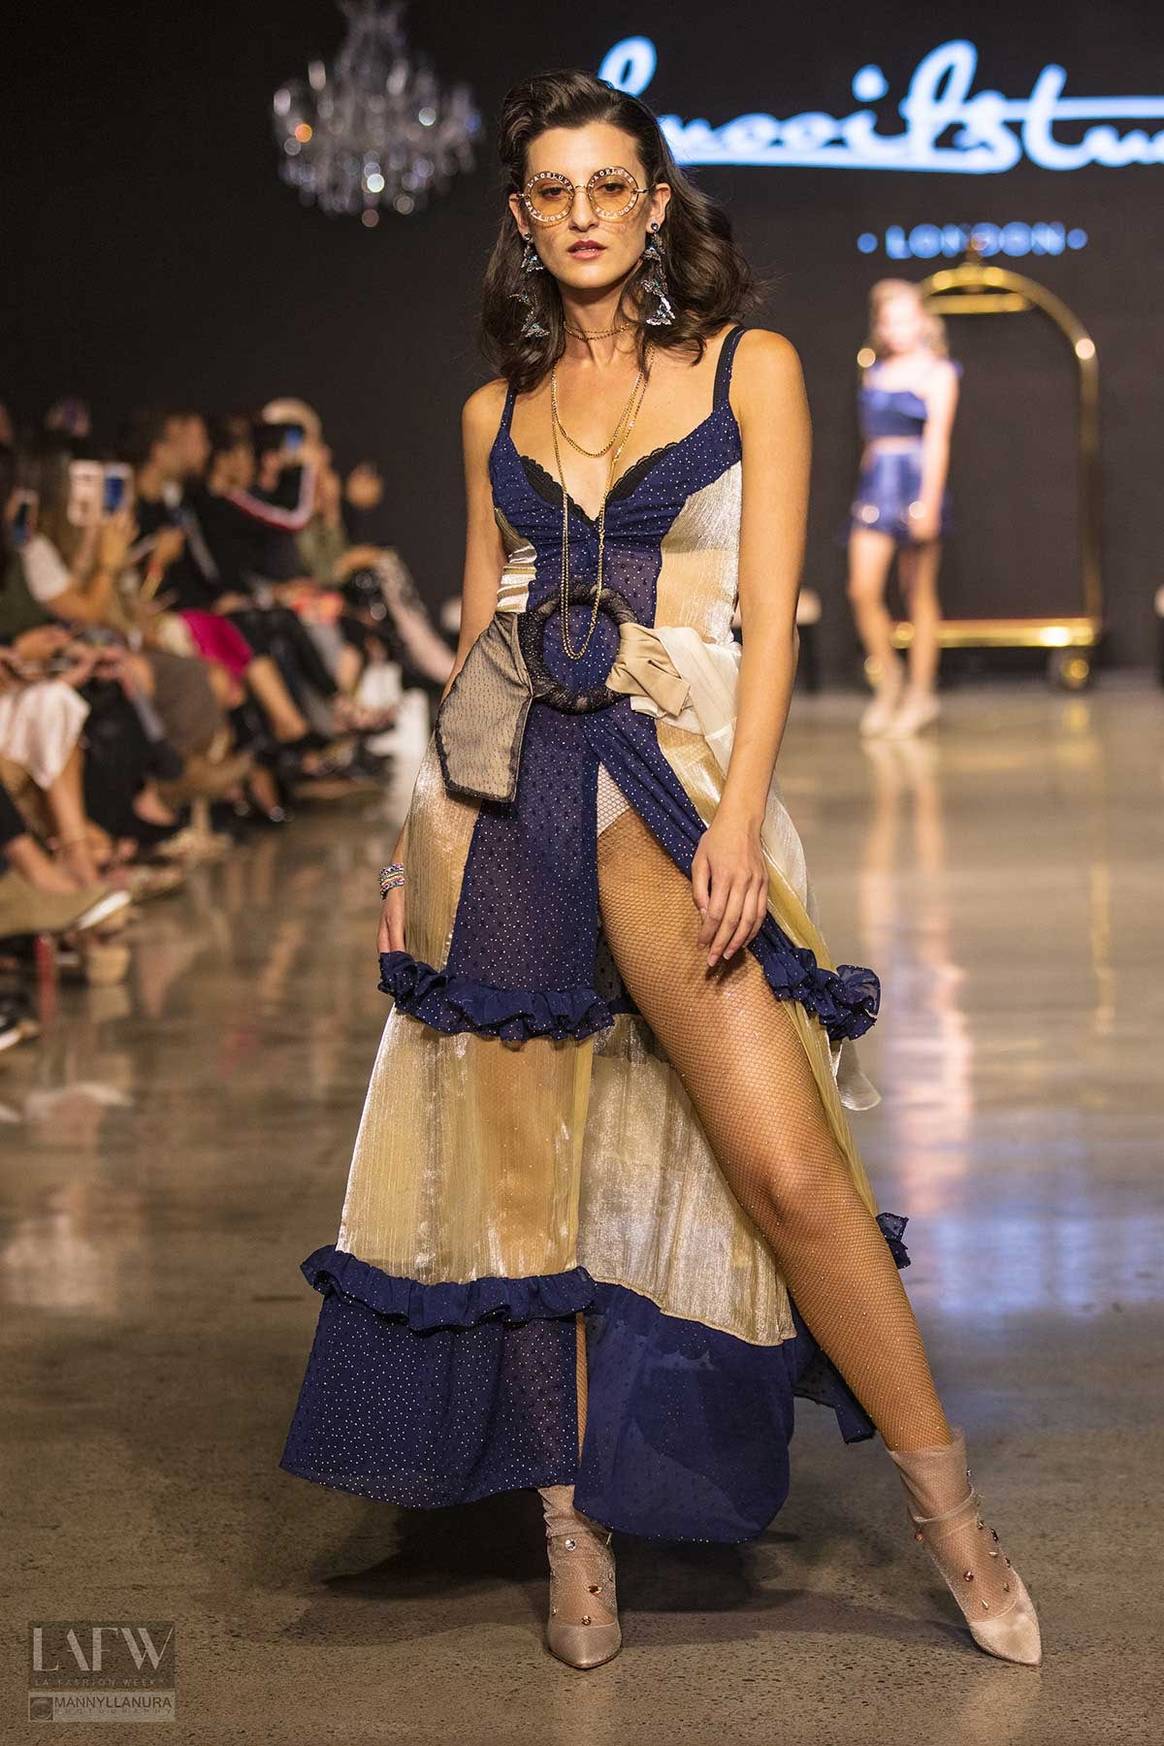 Los Angeles Fashion Week dedicates itself to emerging designers from around the world